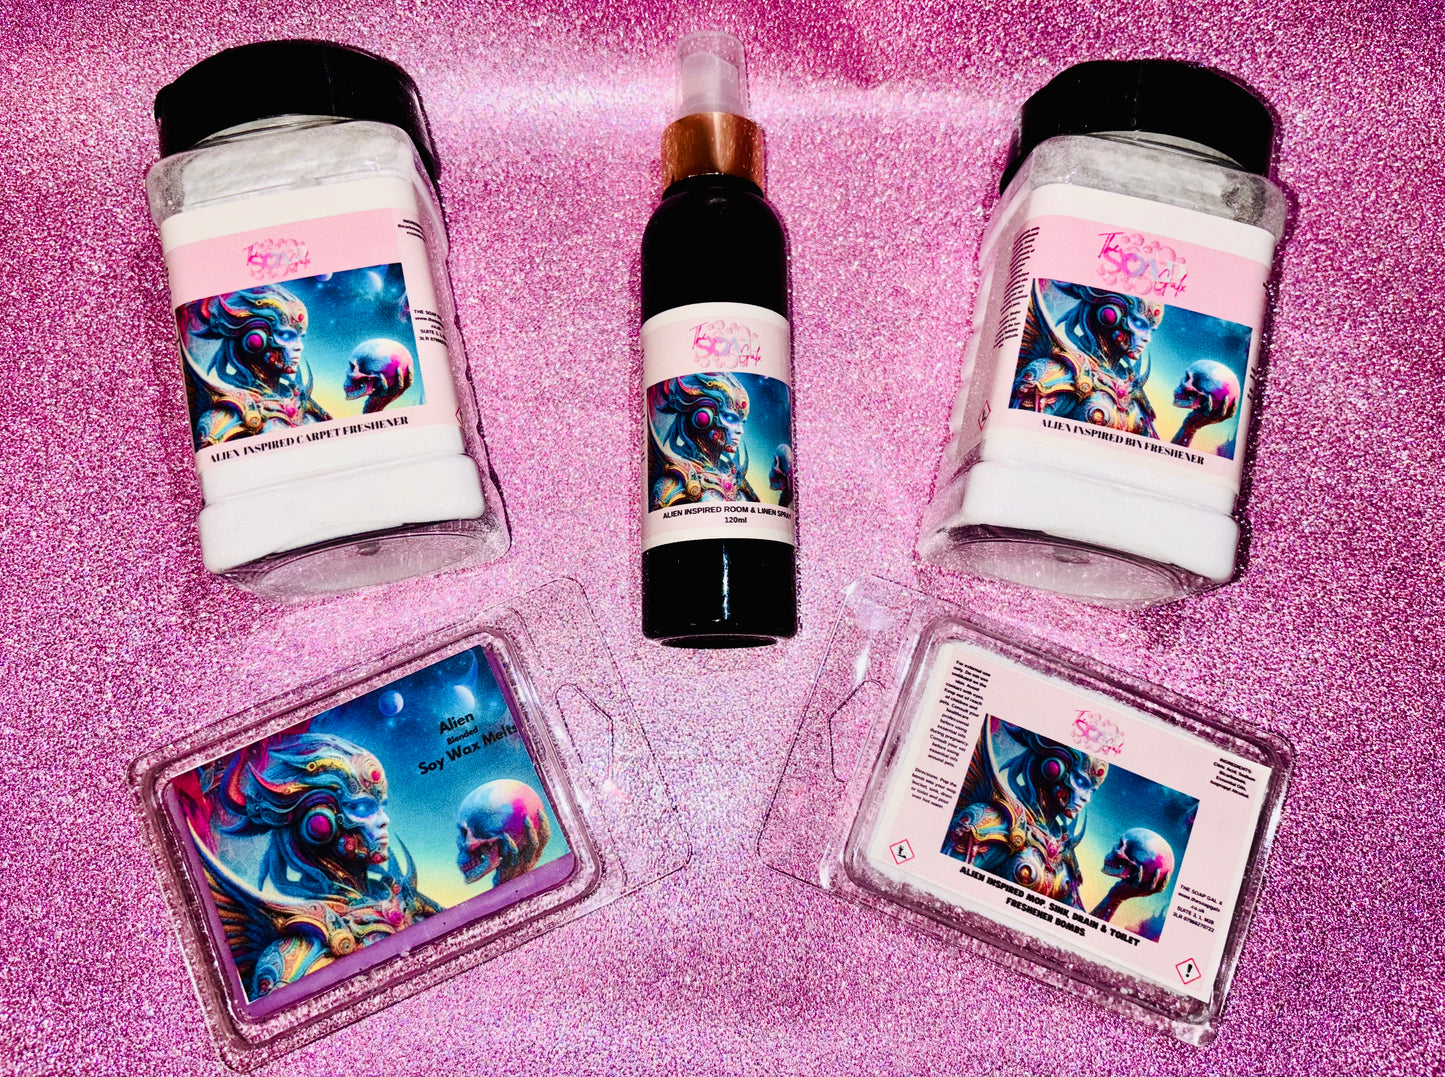 A collection of The Soap Gals' Home Fragrance Cleaning Bundle with a unicorn-themed label design on a glittery pink background.